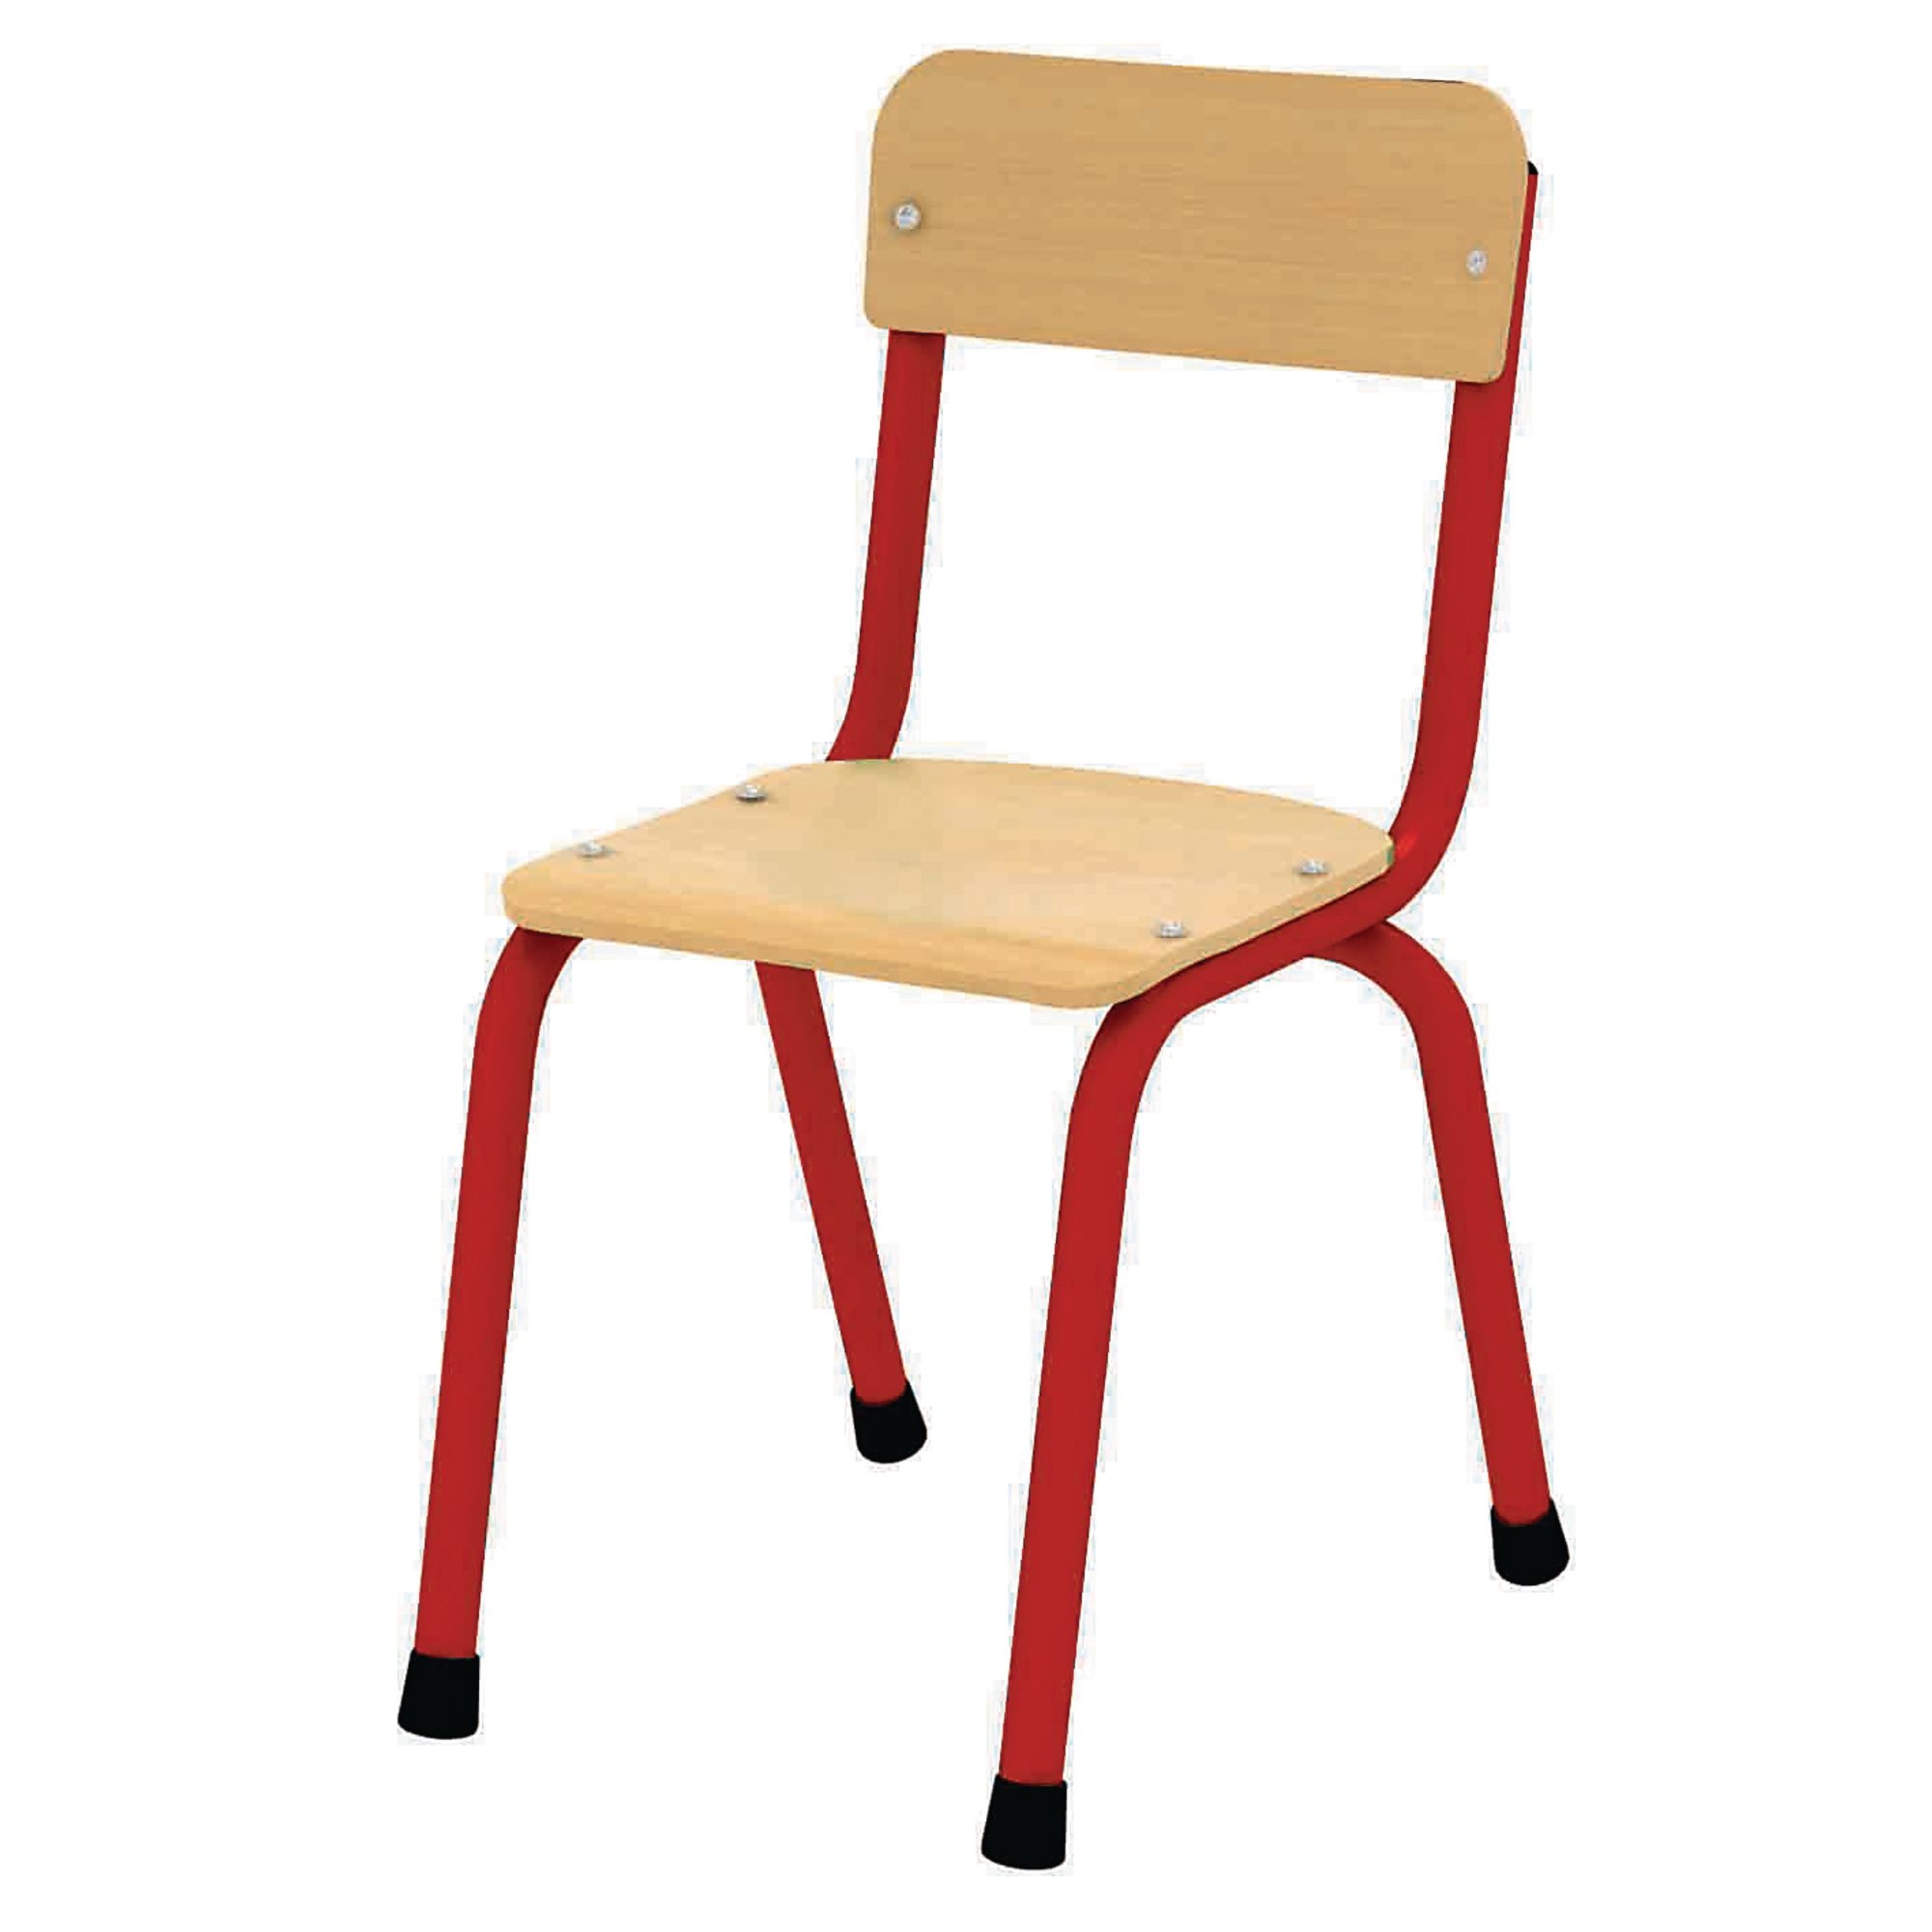 Milan 310mm Seat Height Chairs - Age 4-6 - Red - Set of 4